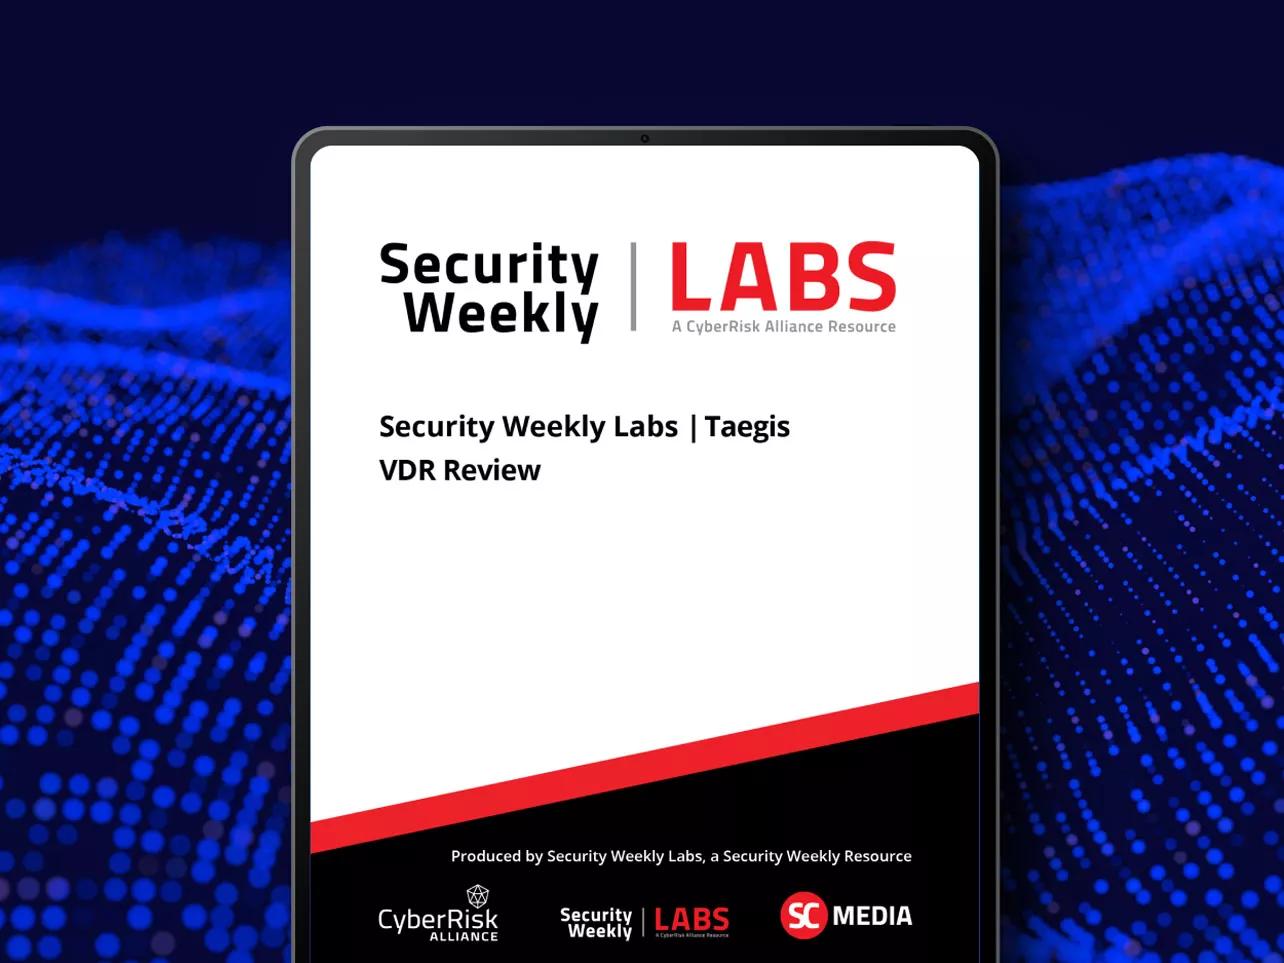 cta-banner-security-weekly-labs-taegis-vdr-review